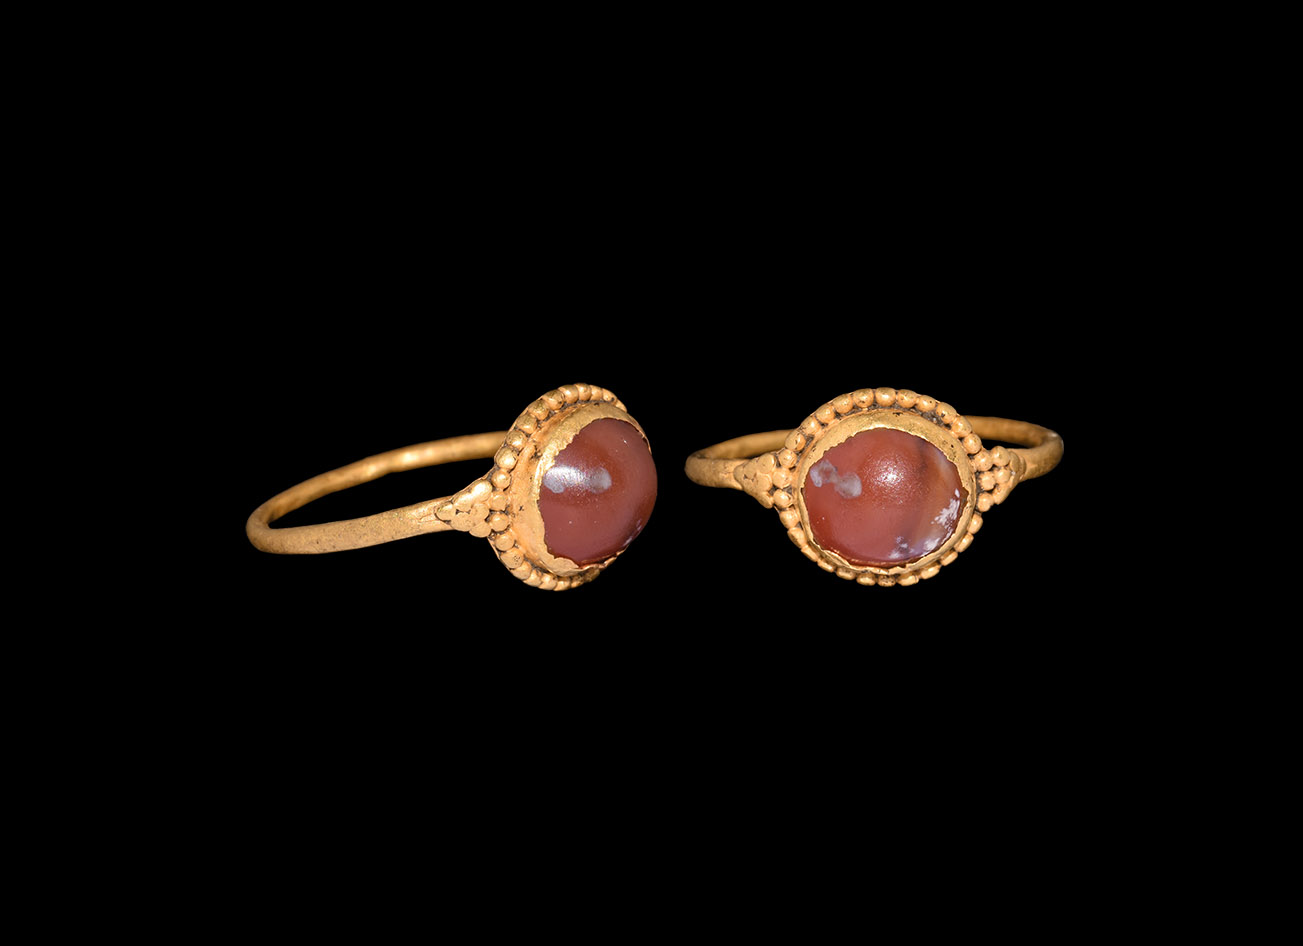 Greek Gold Ring with Carnelian Cabochon